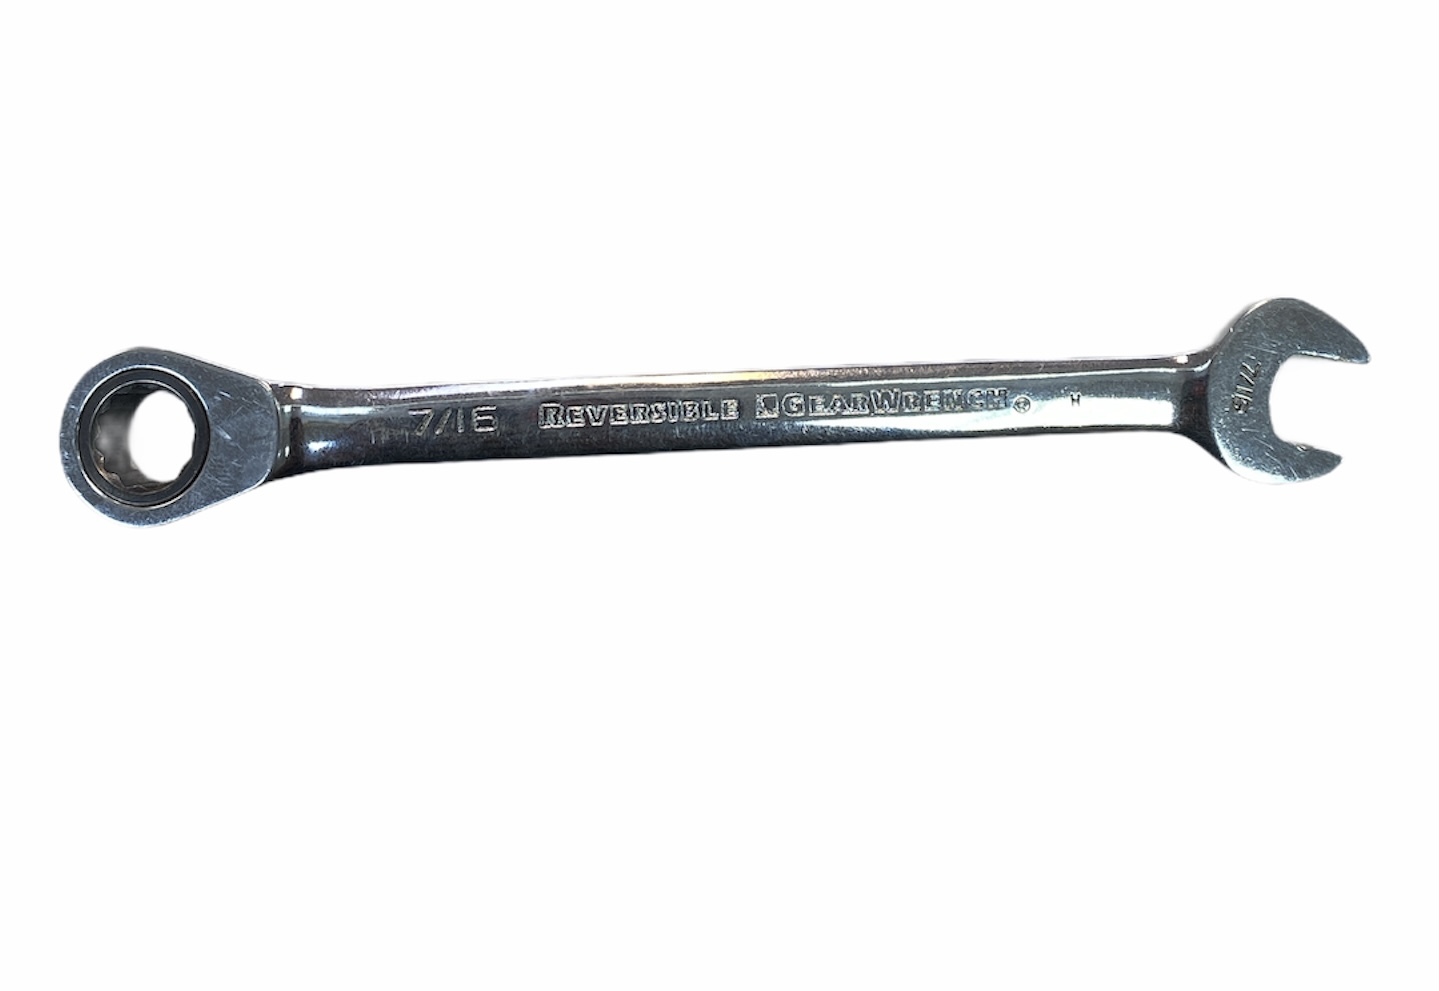 Gearwrench Auto service tools Reversible ratcheting wrench 285830 - $9.99